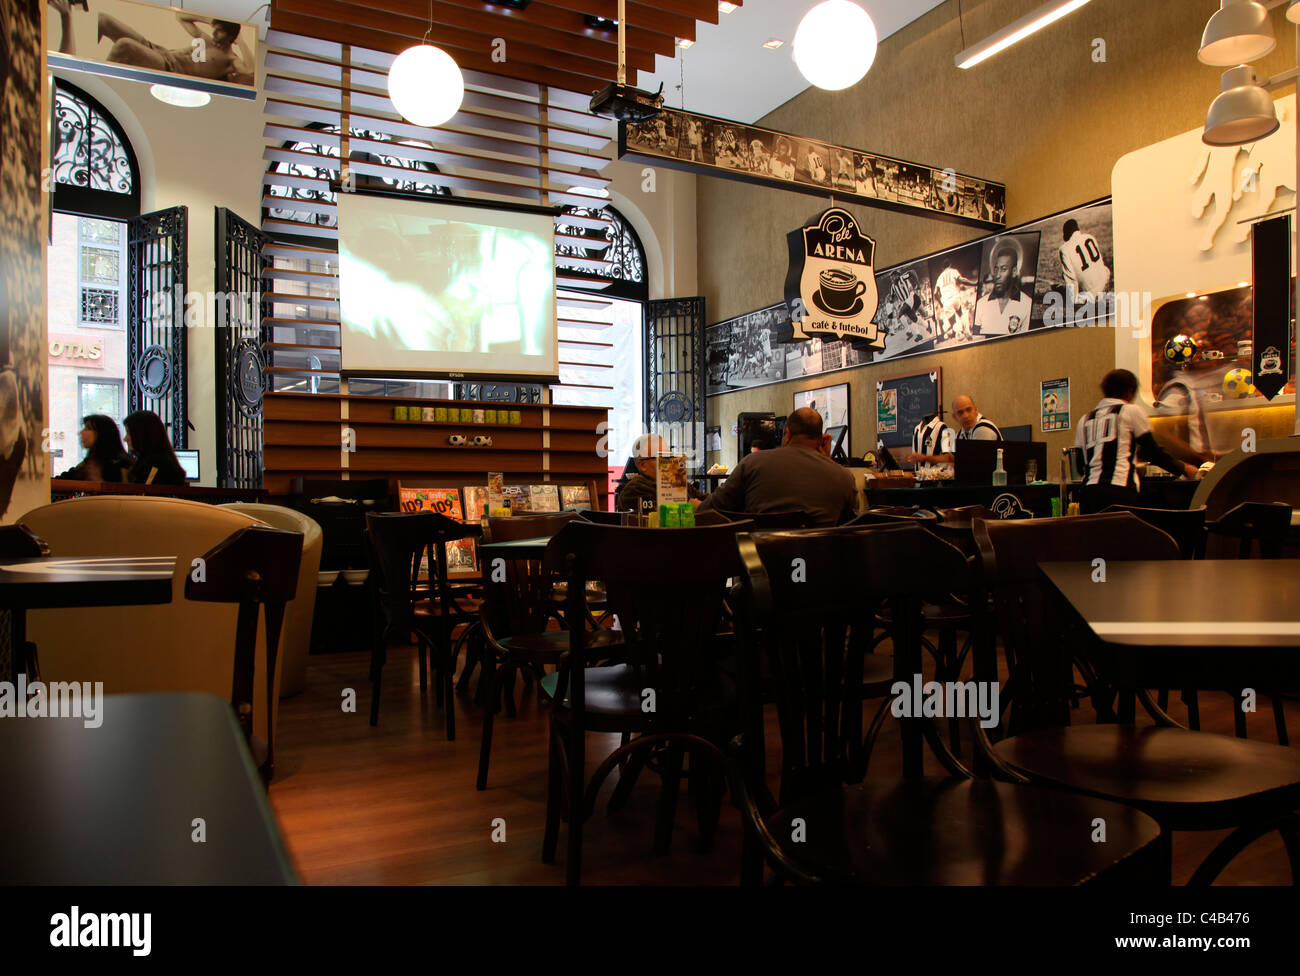 'Pele Arena - cafe & futebol' is a cafe in donwtown Sao Paulo. Brazil Stock Photo